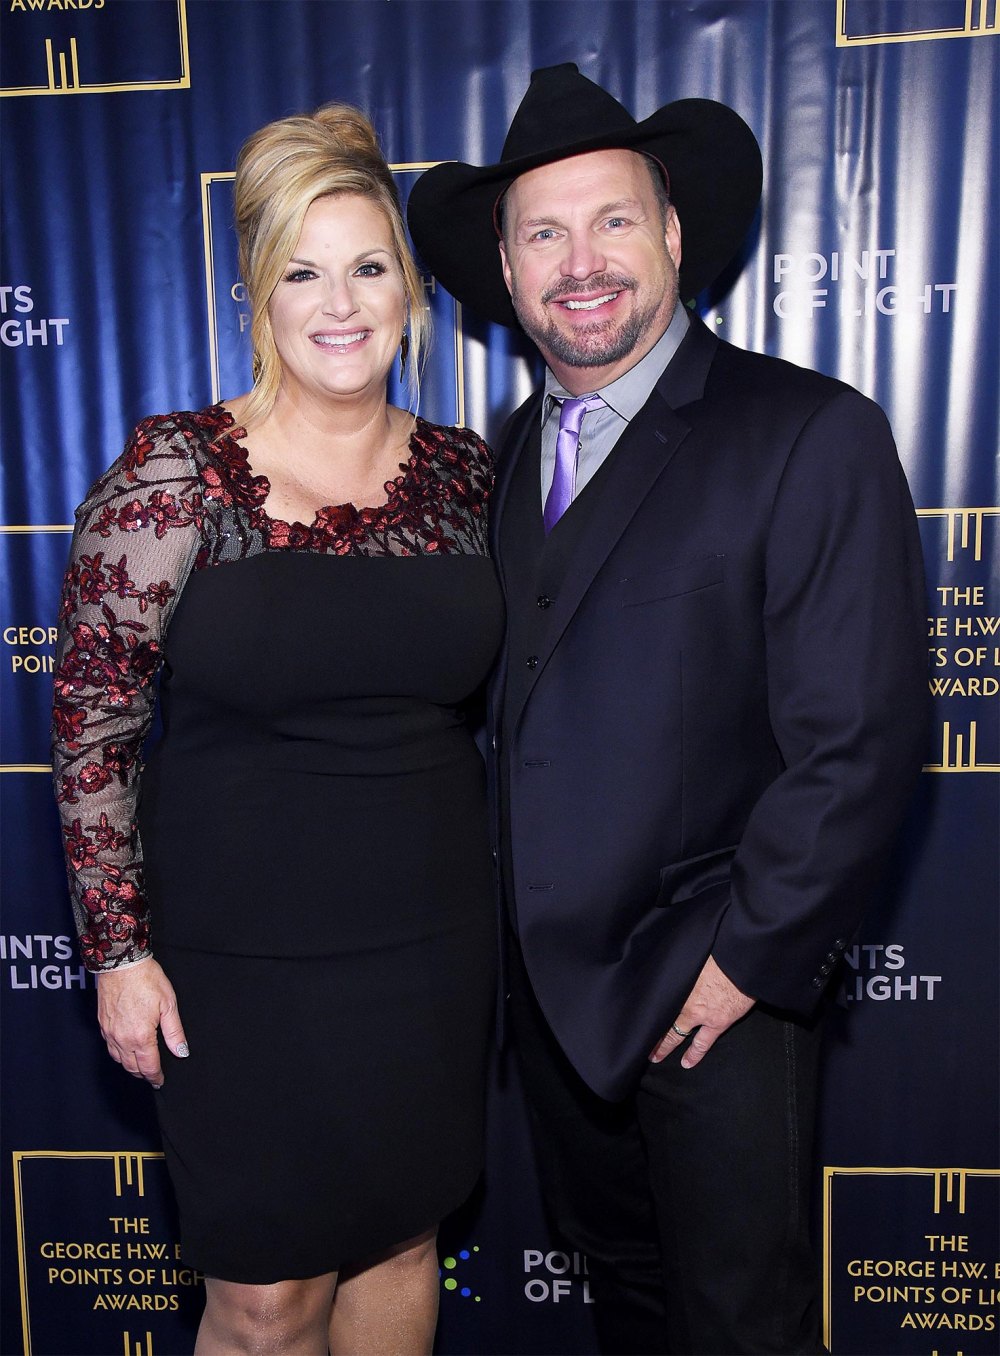 Garth Brooks and Trisha Yearwoods Sweetest Quotes About Their Marriage